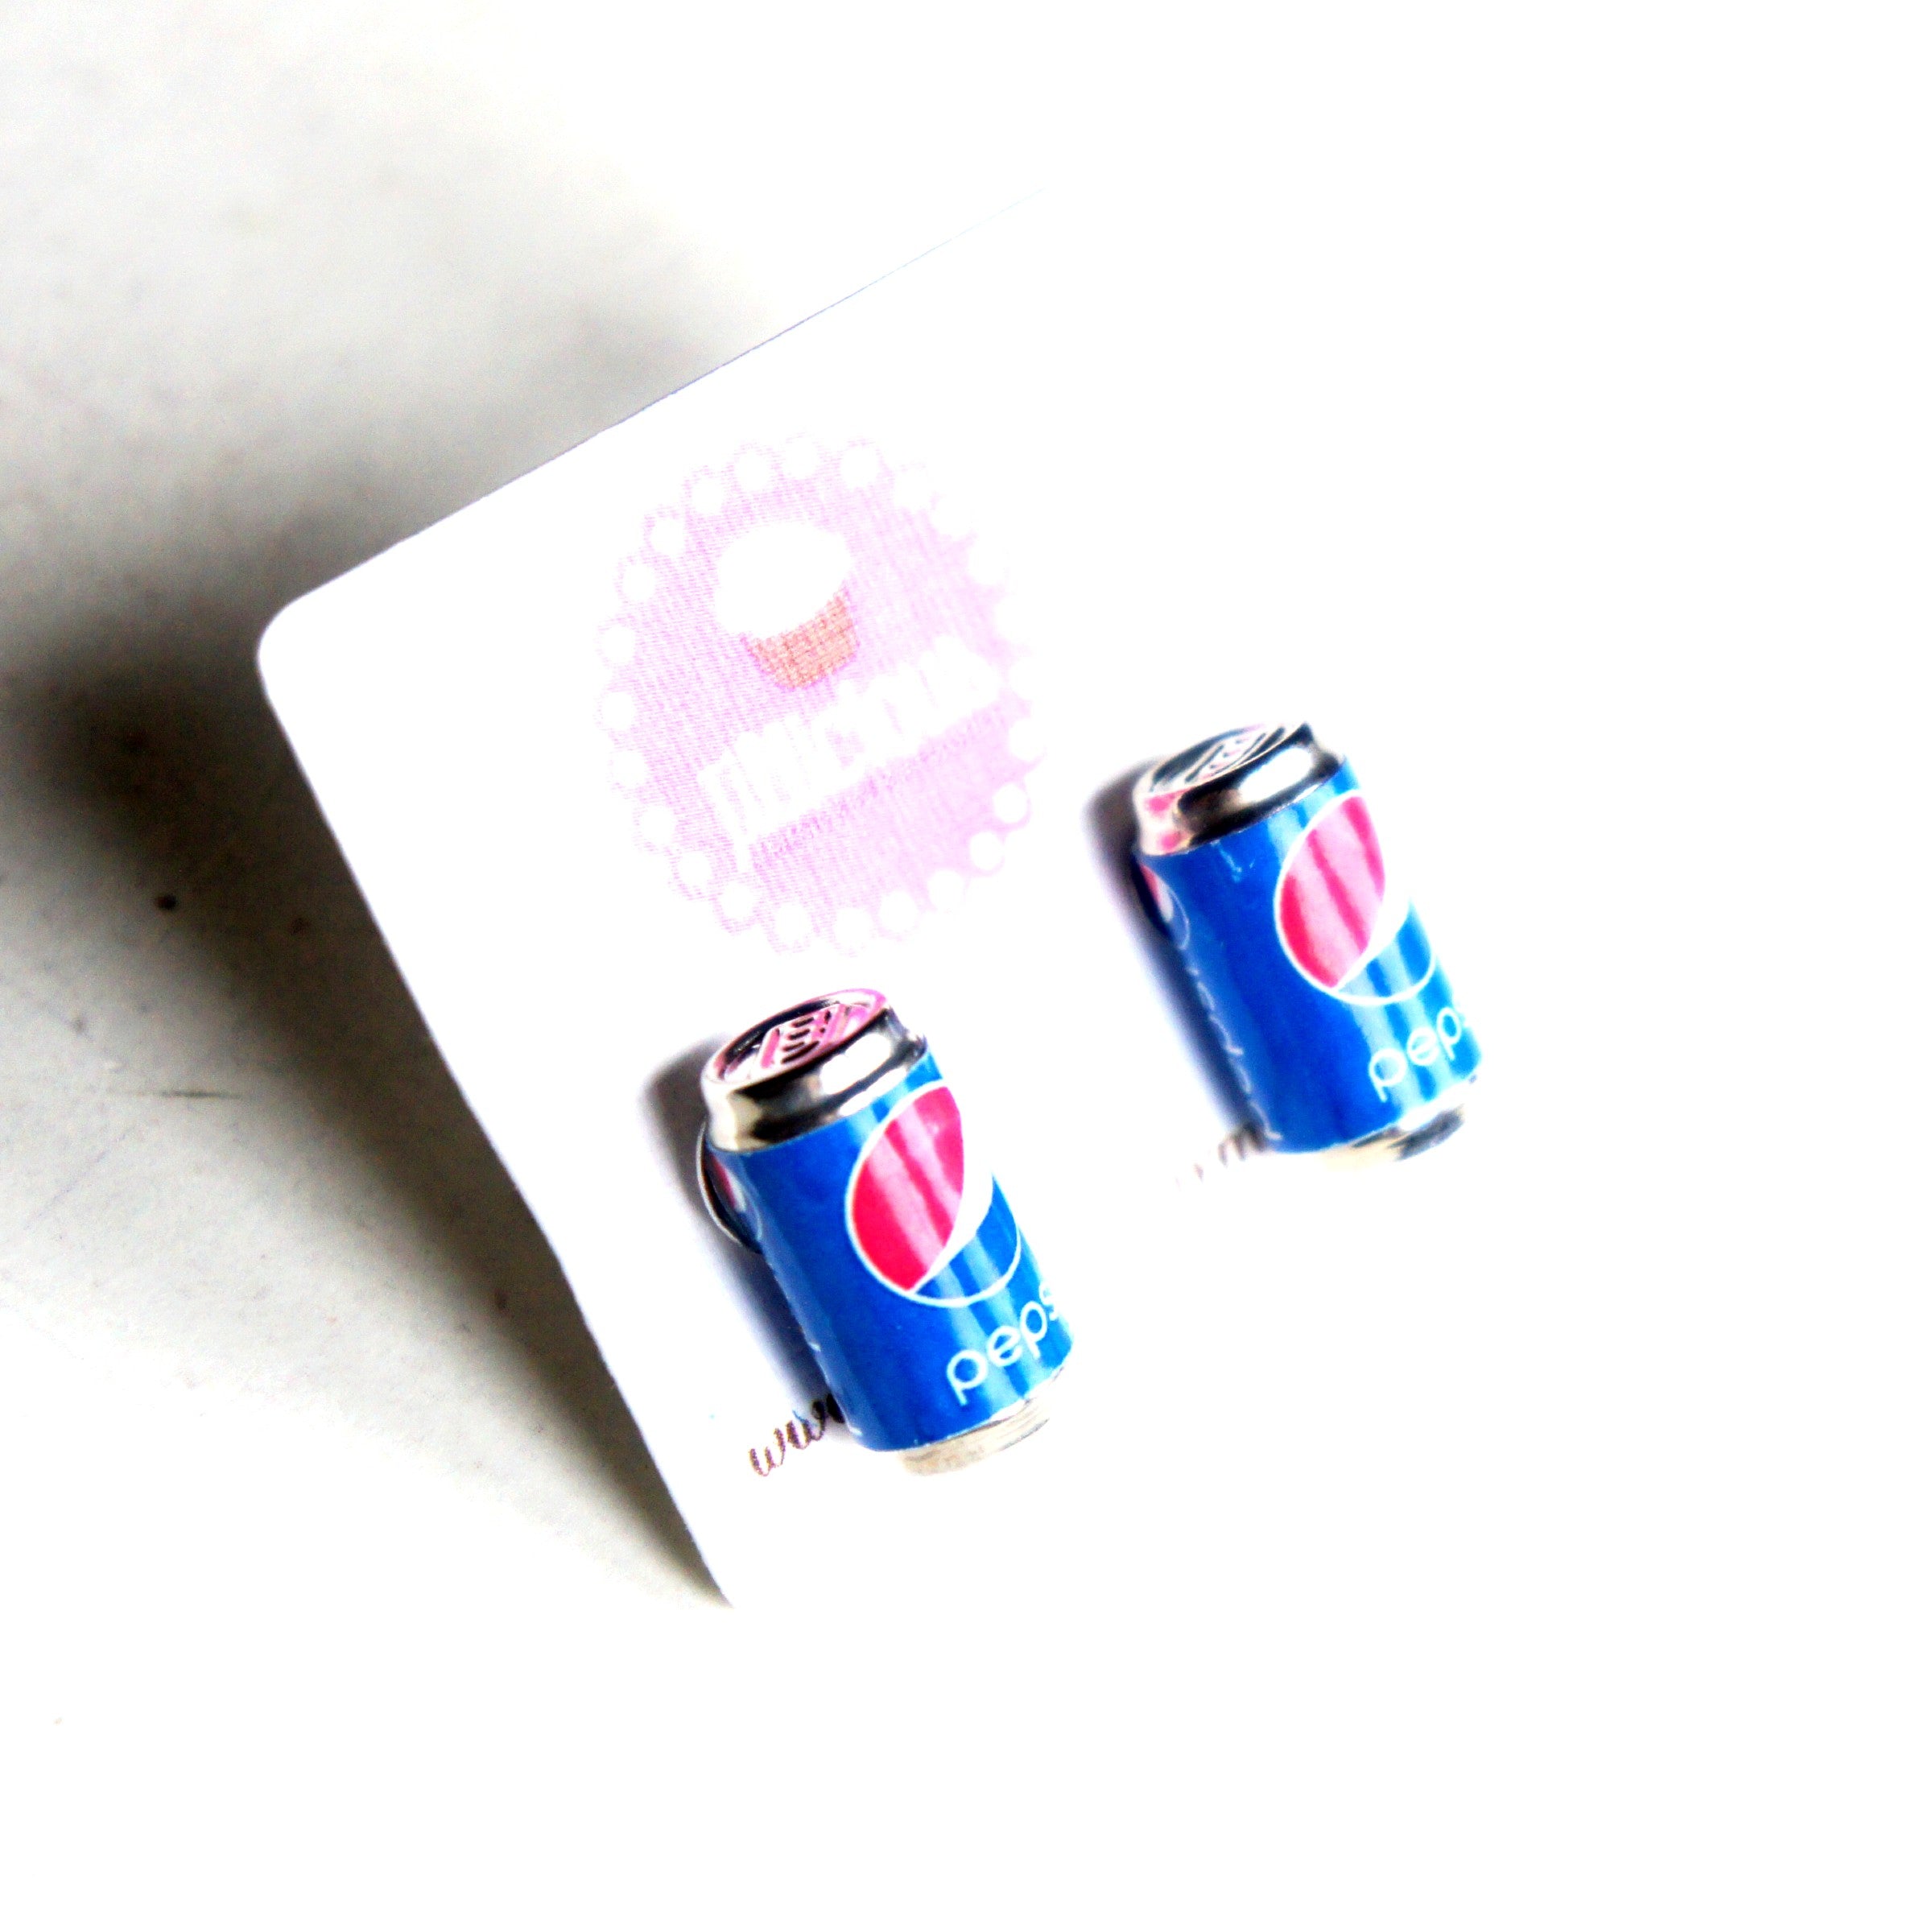 Pepsi Soda Can Earrings - Jillicious charms and accessories